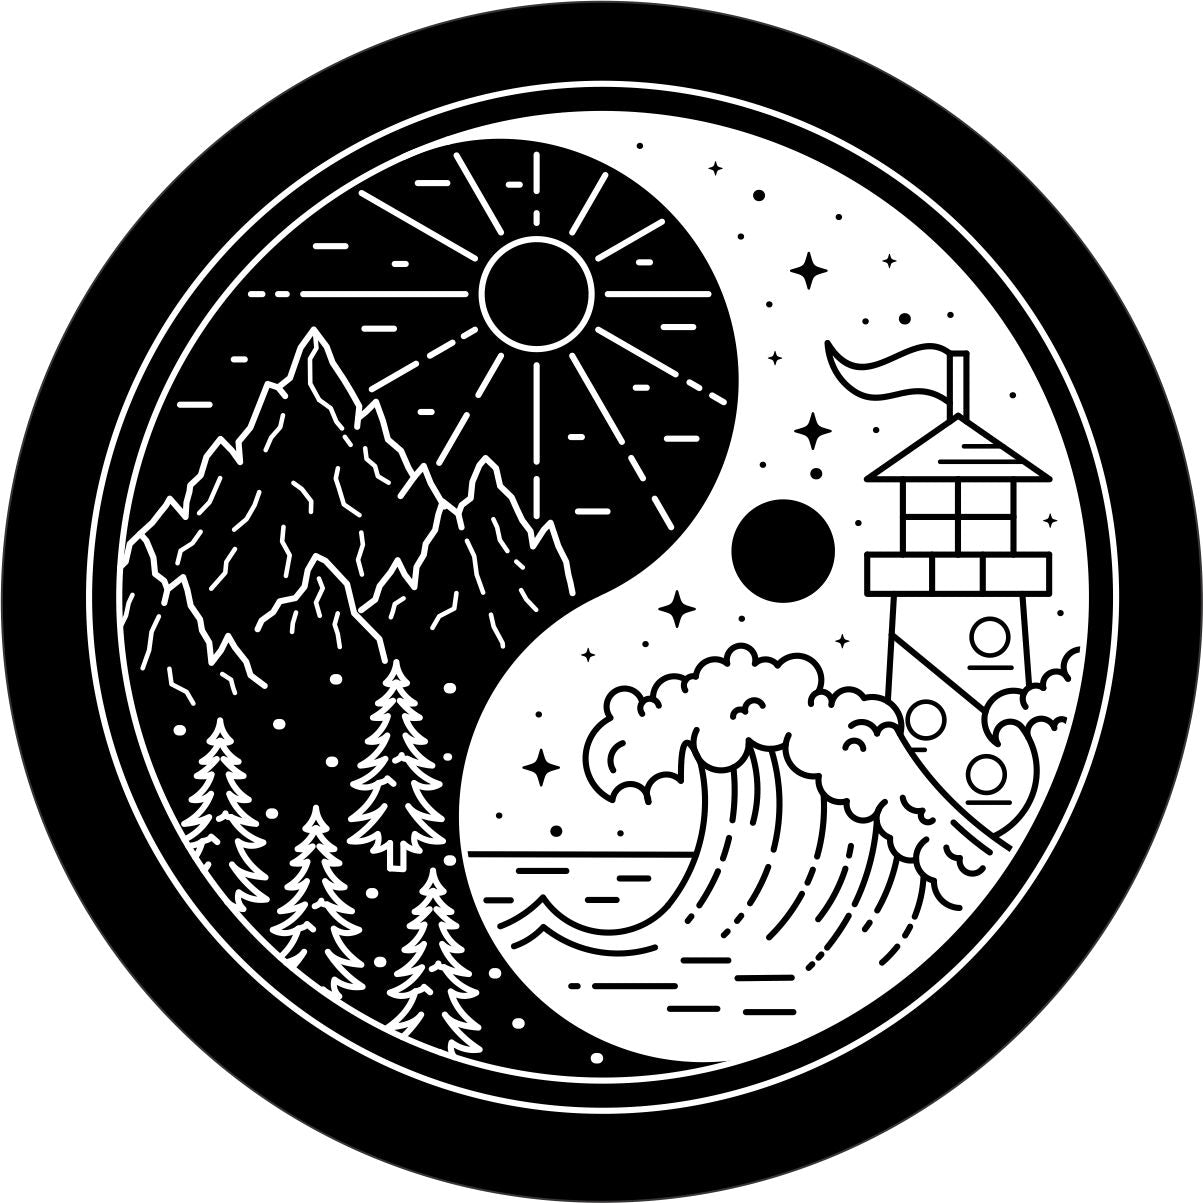 Yin yang spare tire cover design with mountains on one side and the beach and lighthouse on the other side of the yin yang symbol